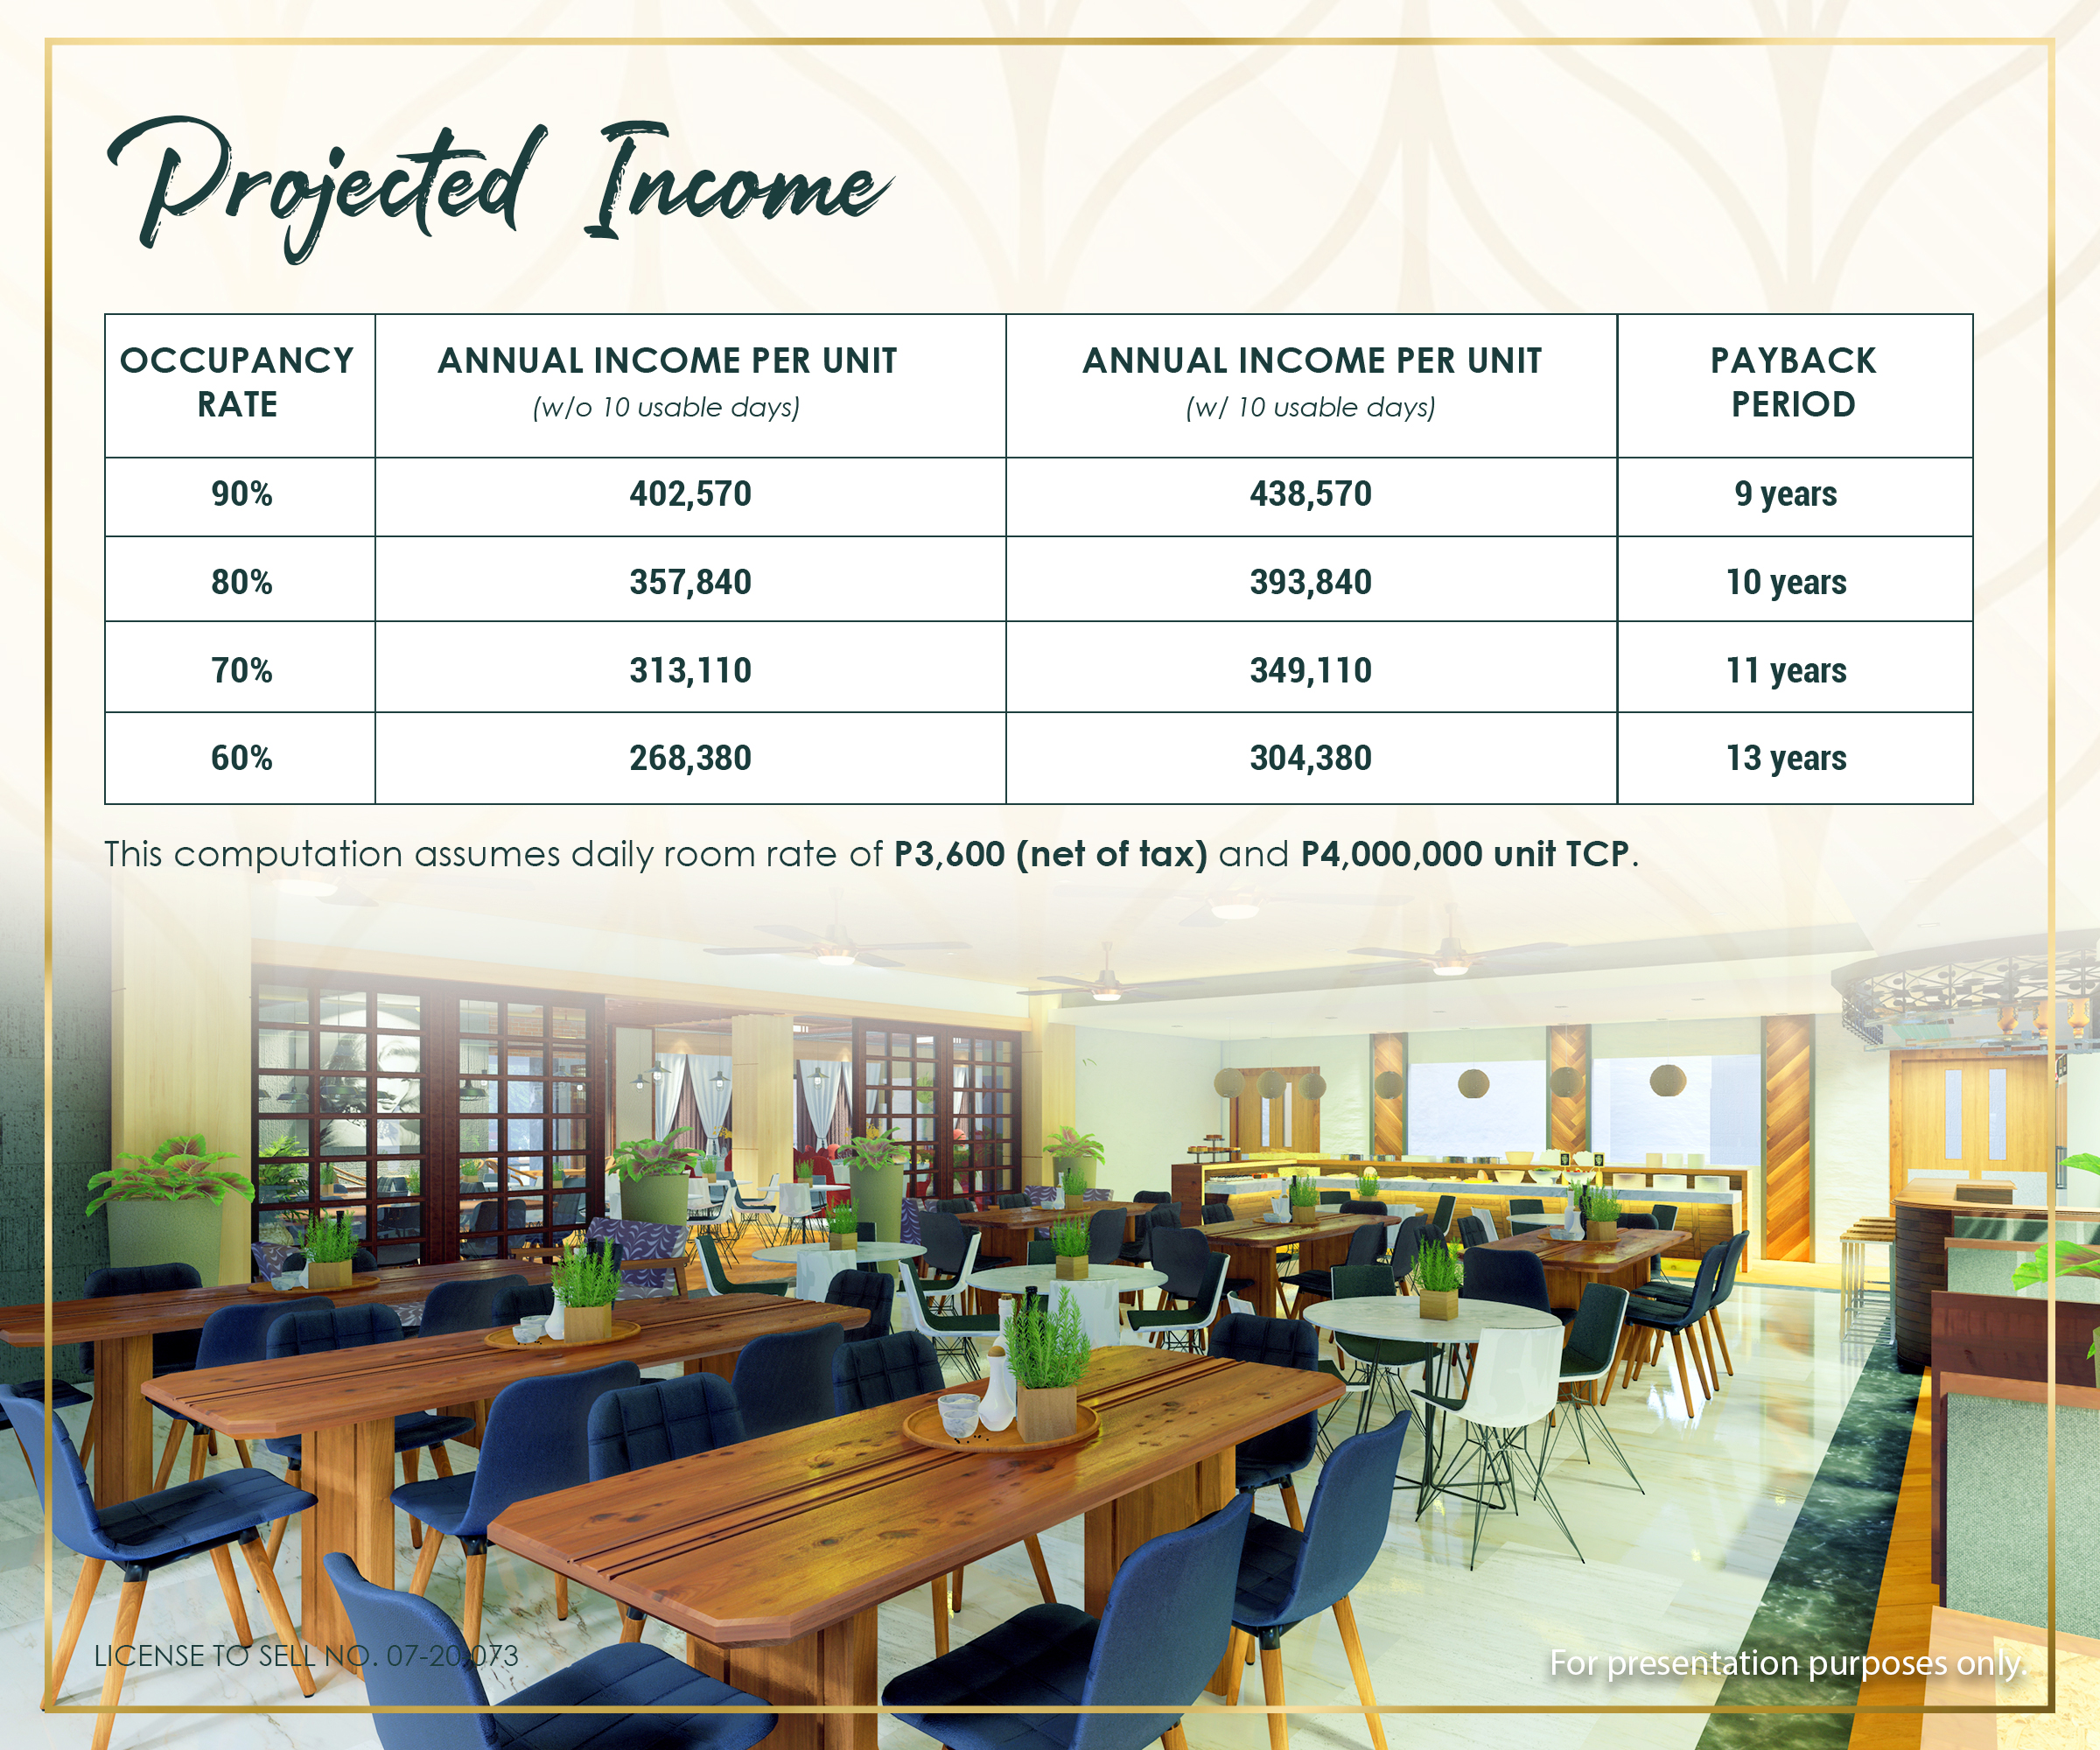 Atharra Suites Panglao projected income